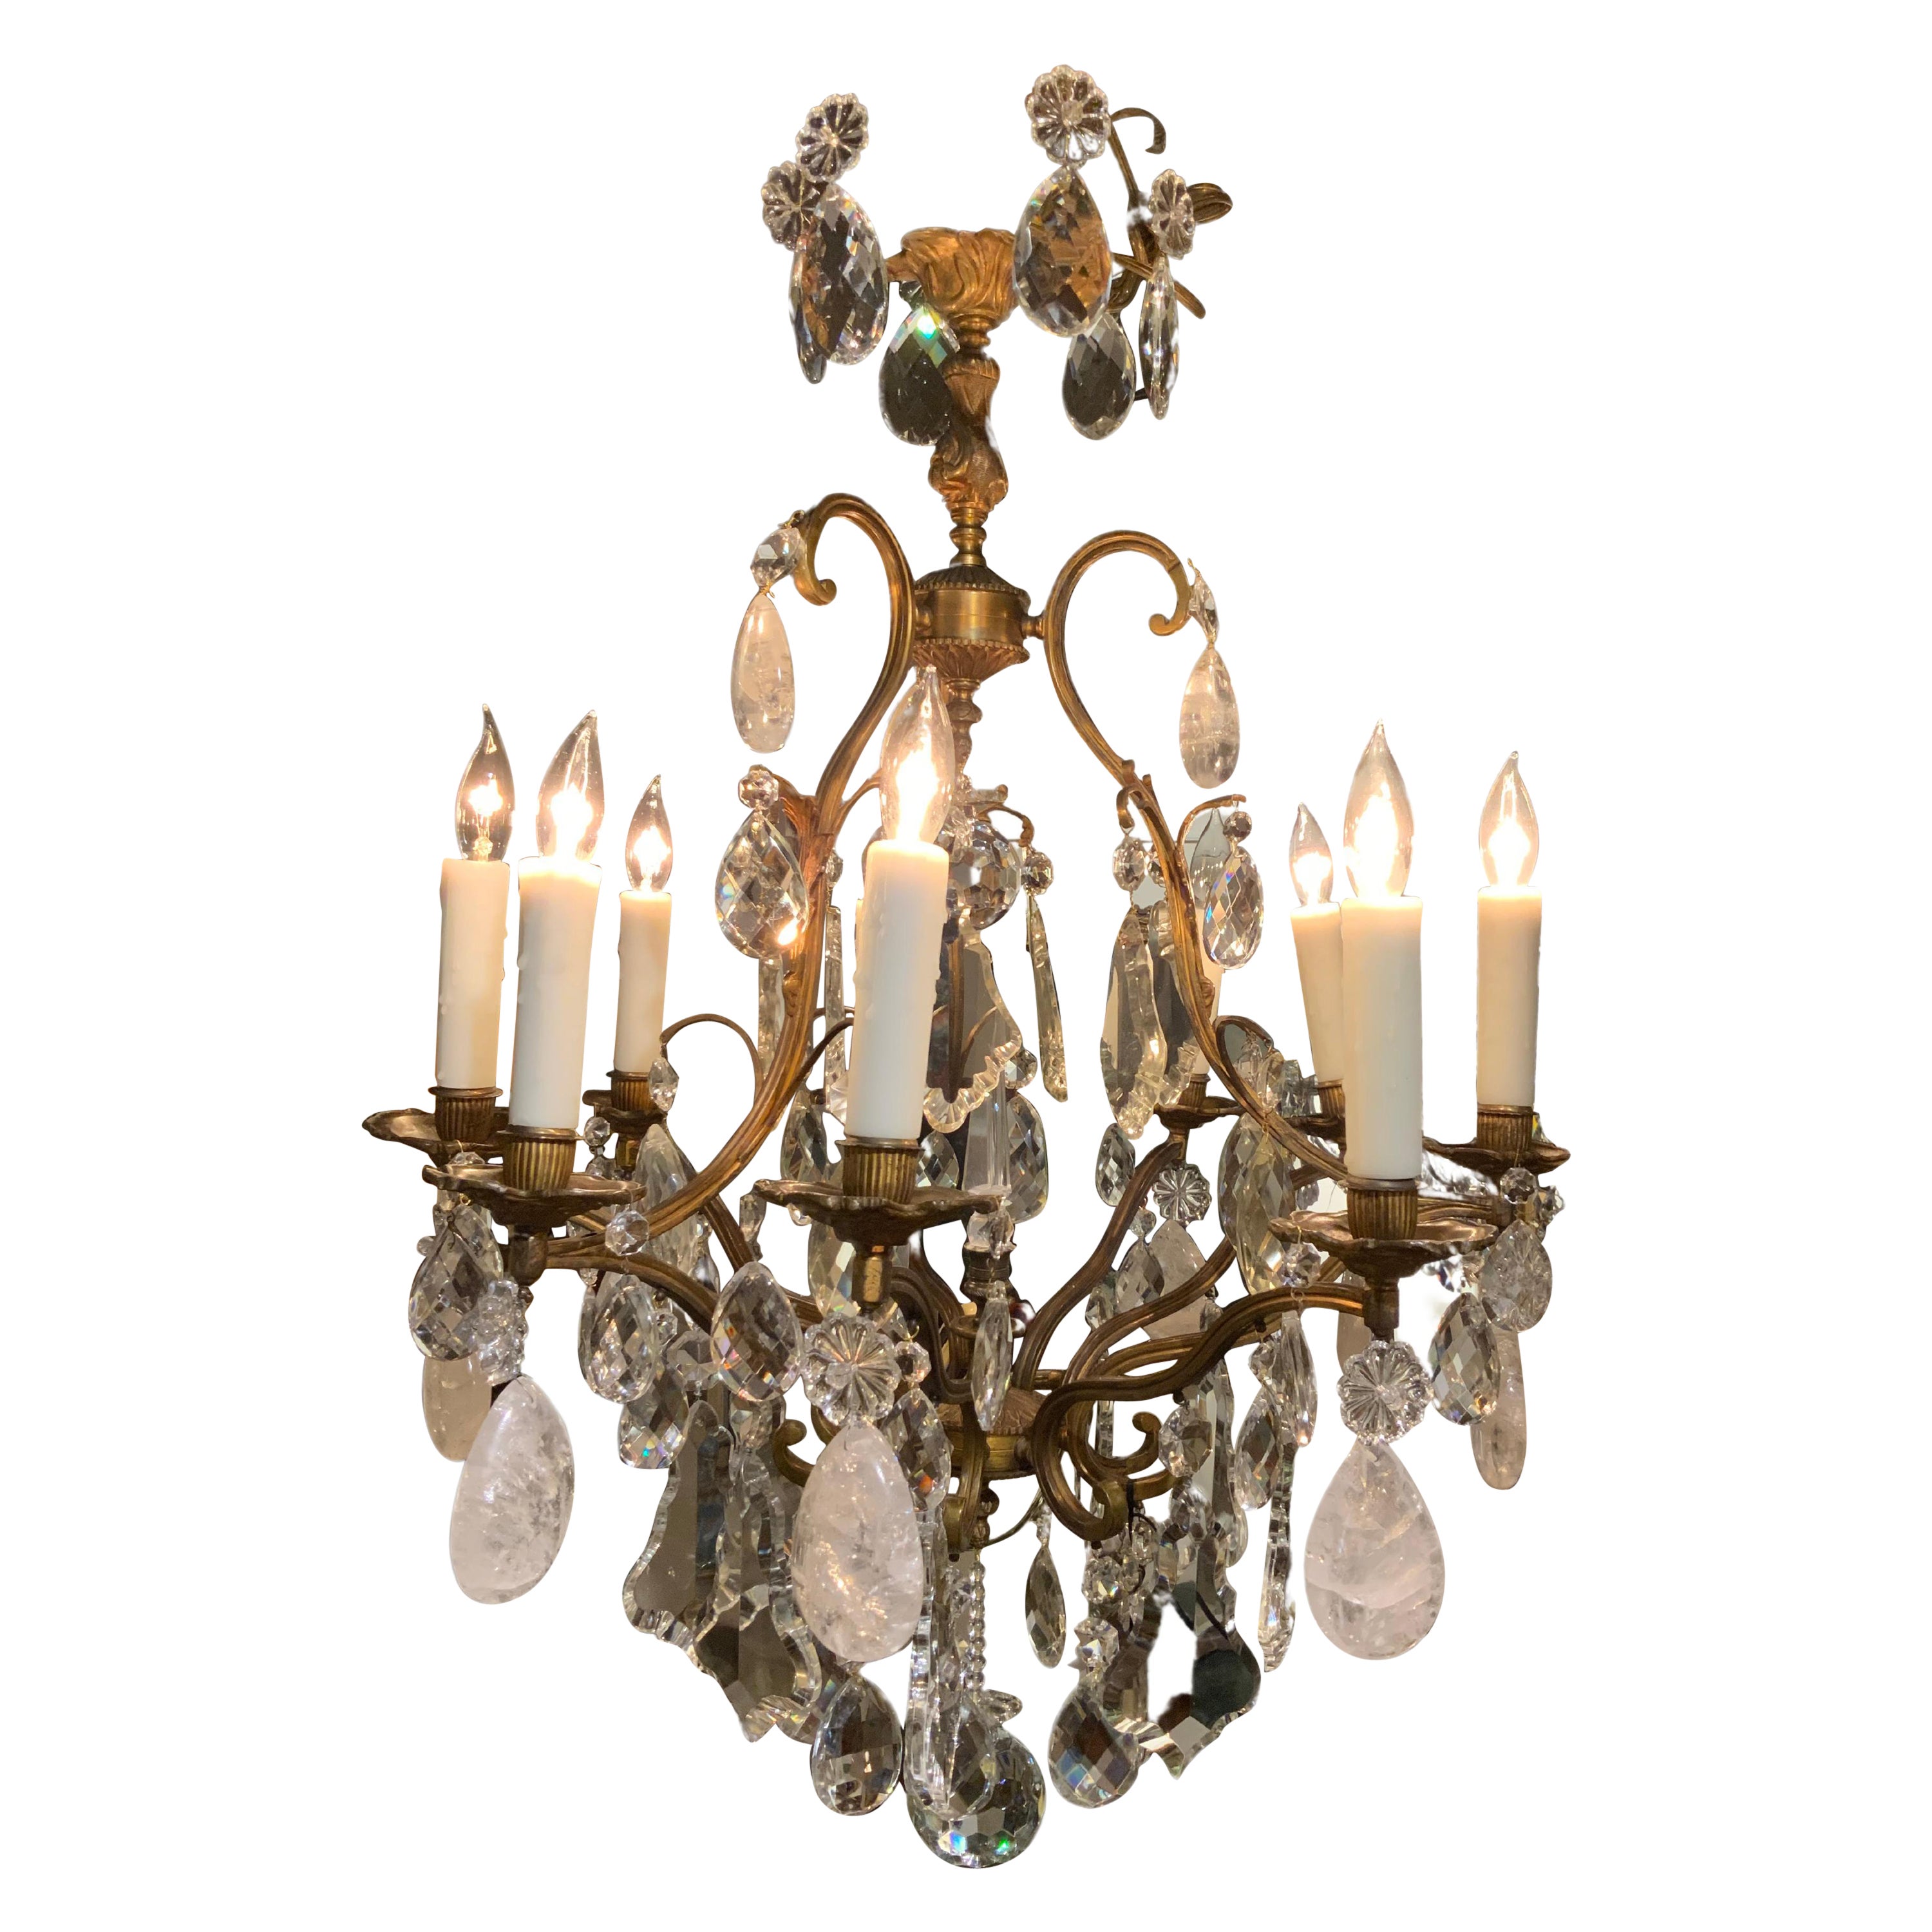 Bronze and Crystal Nine Light Chandelier with Scrolling Arms and Rock Crystals